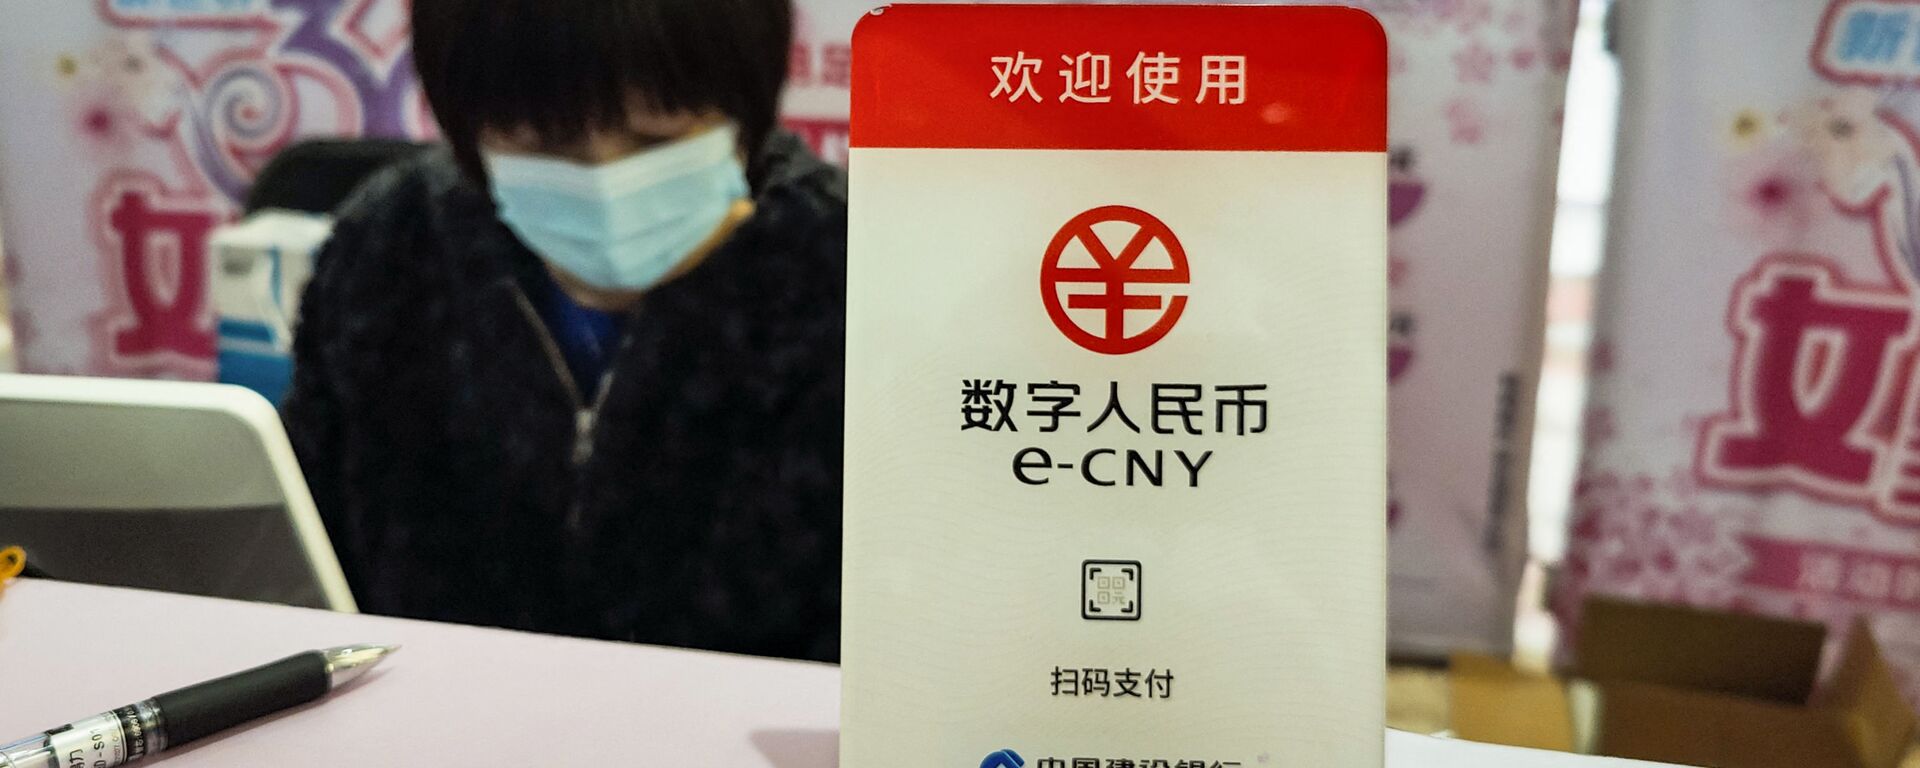 A sign for China’s new digital currency, electronic Chinese yuan (e-CNY) is displayed at a shopping mall in Shanghai on March 8, 2021 - Sputnik International, 1920, 03.08.2023